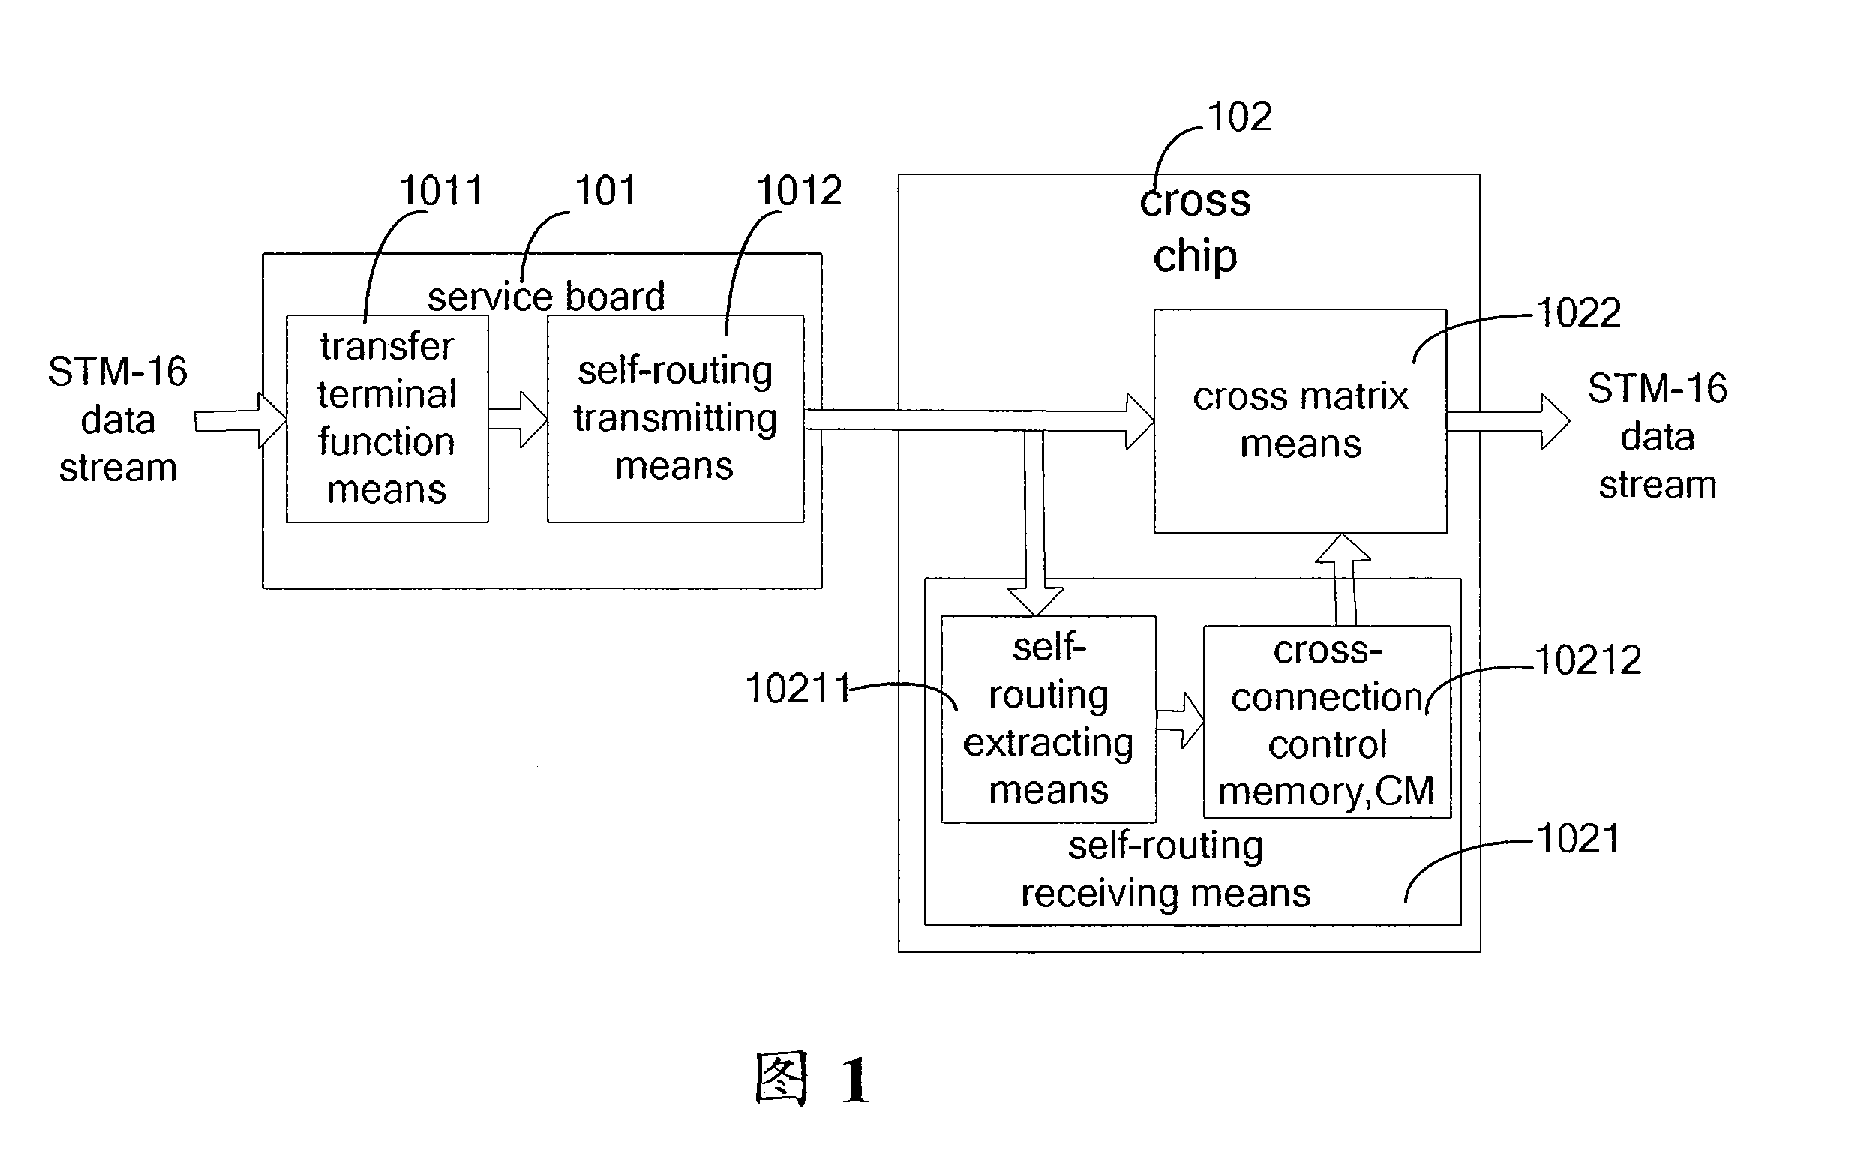 Method and system for self-routing in synchronous digital cross-connection